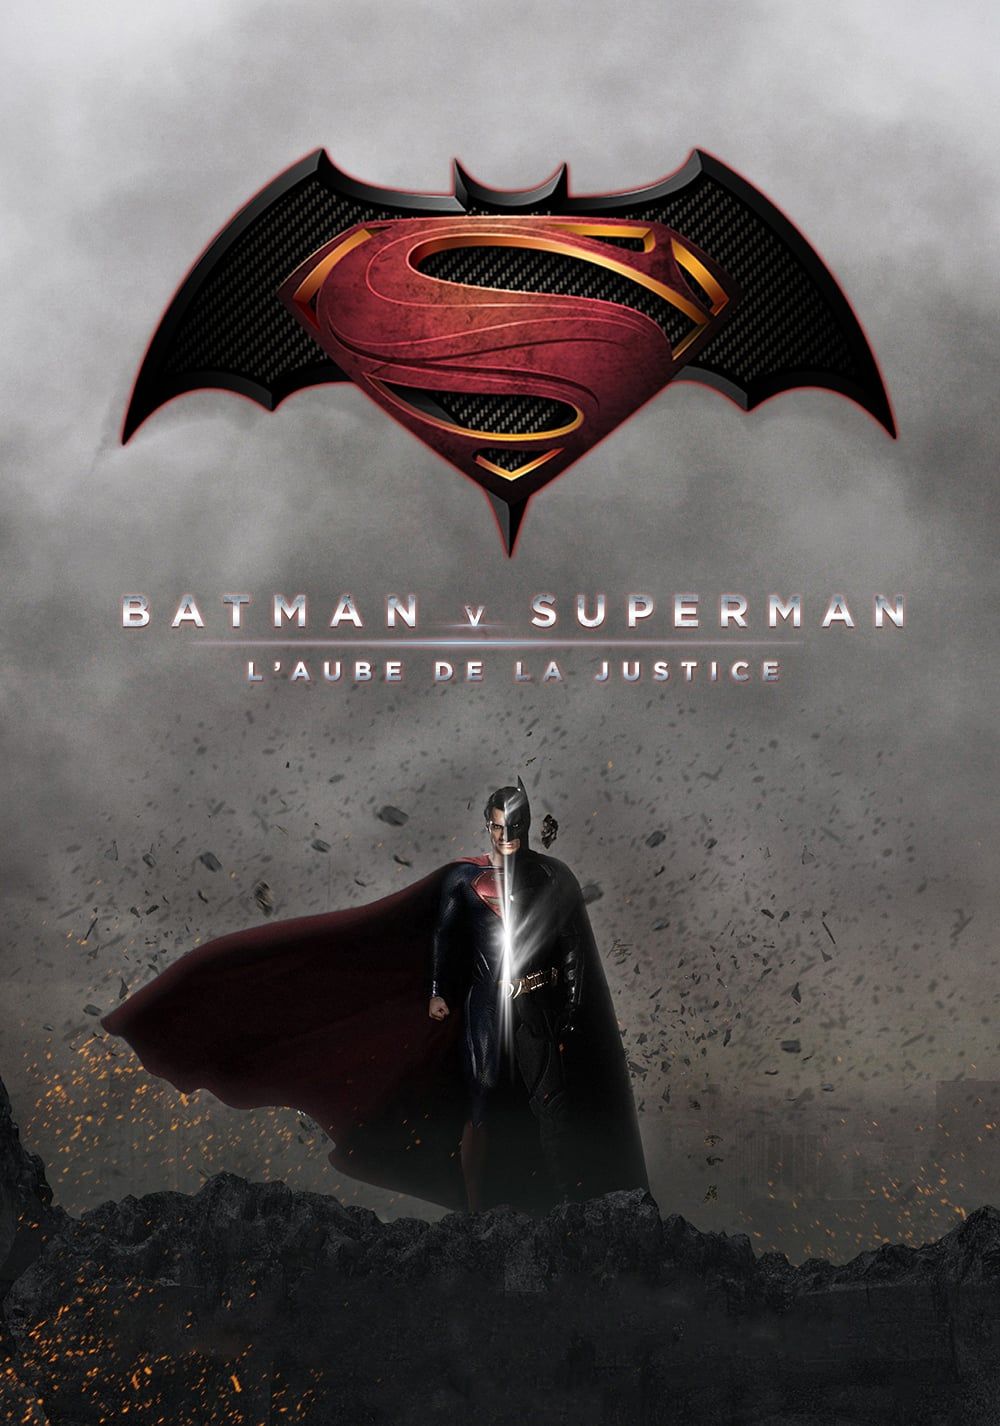 Batman v Superman: Dawn of Justice (2016) Poster: DC extended universe Photo